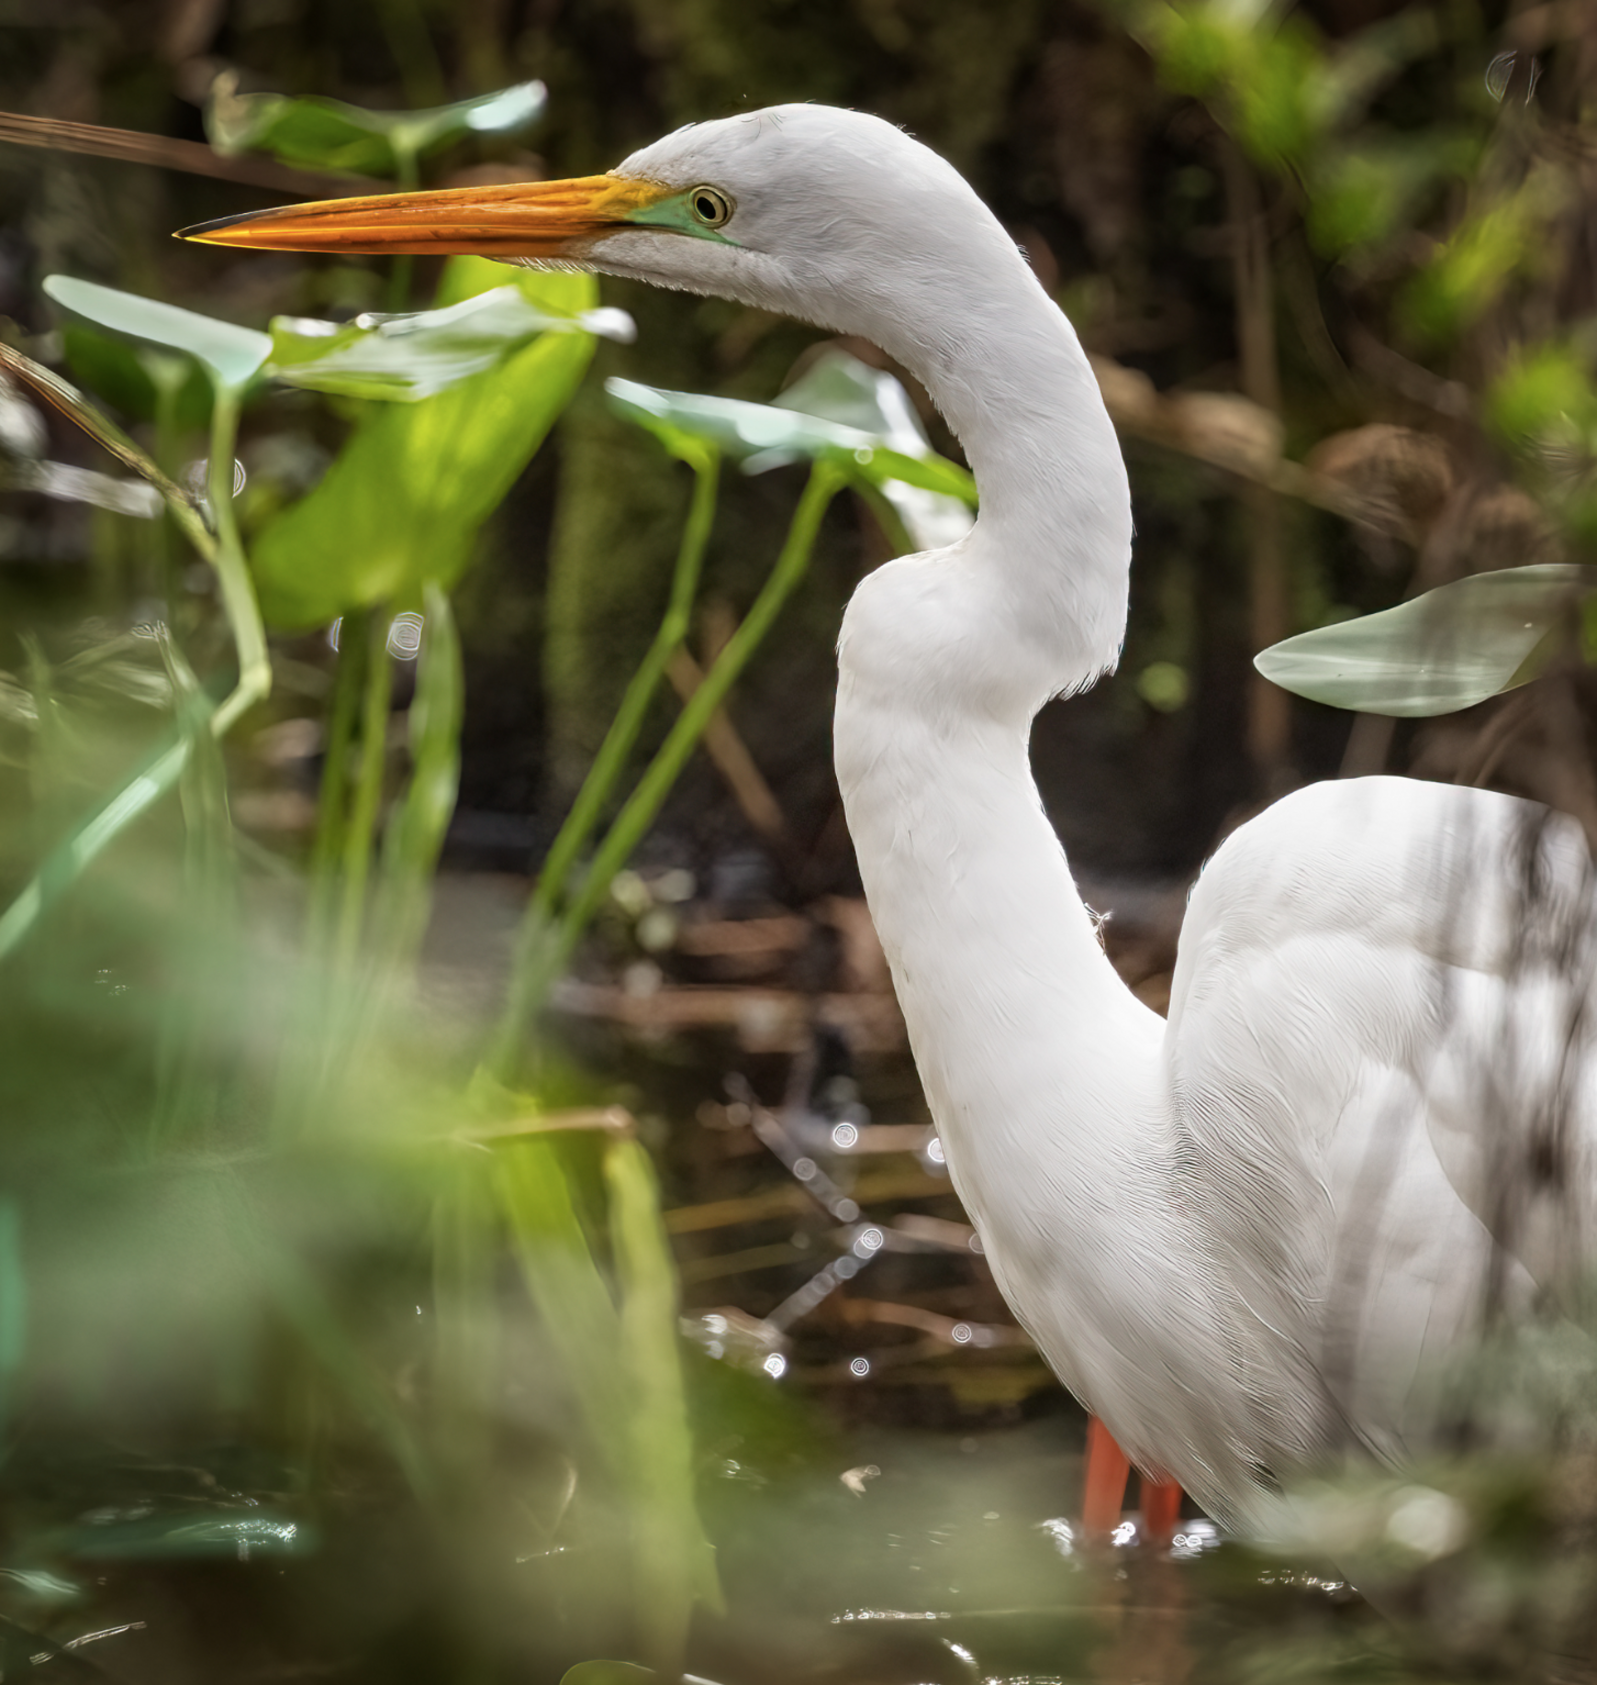 Great Egret hunting in the reeds.